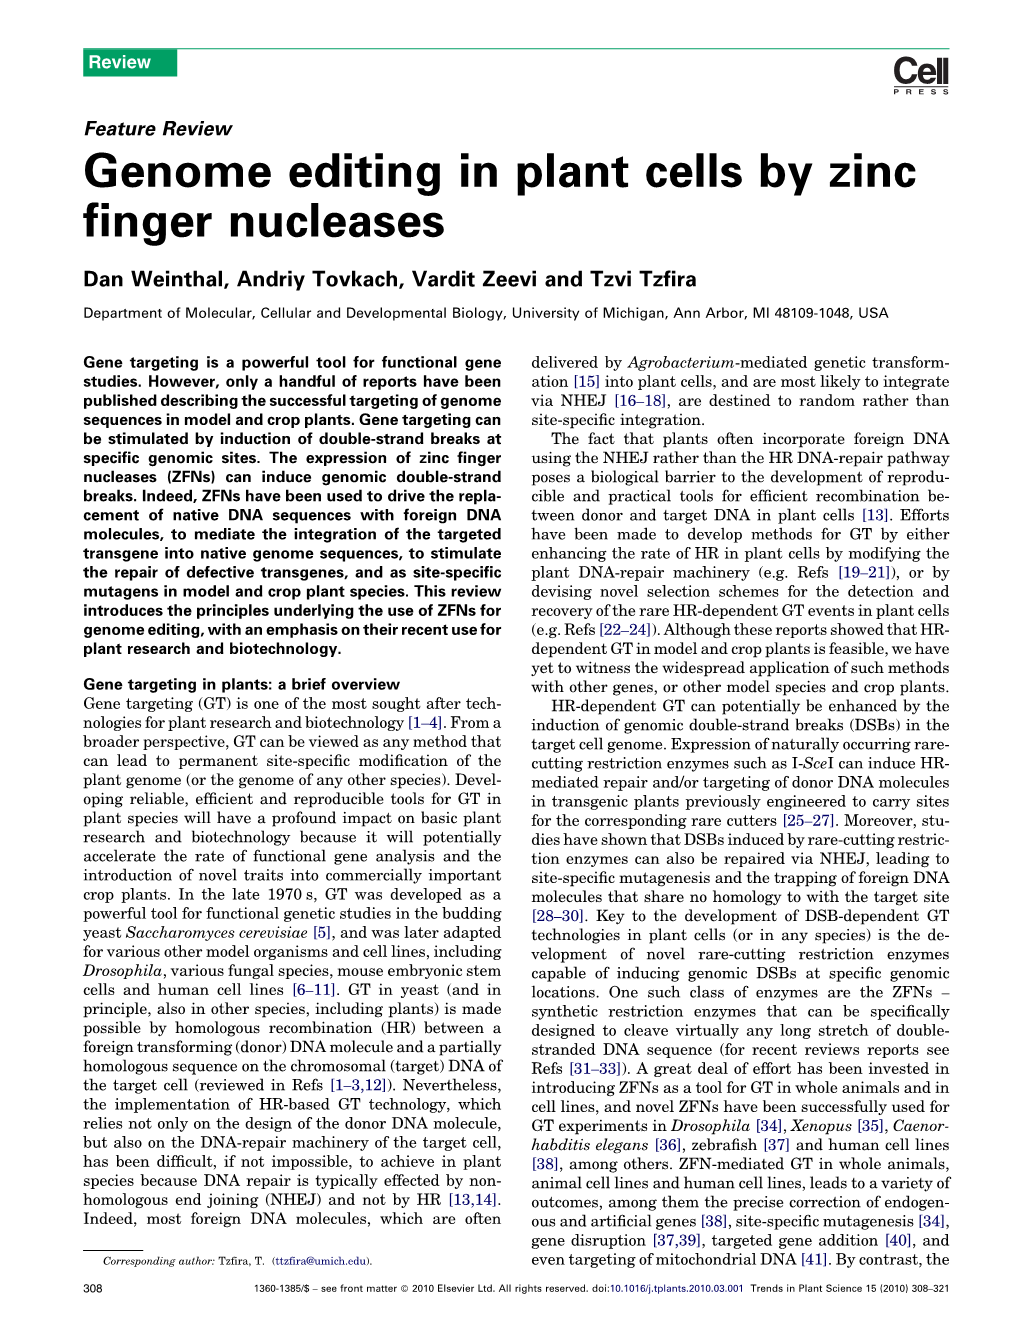 Genome Editing in Plant Cells by Zinc Finger Nucleases